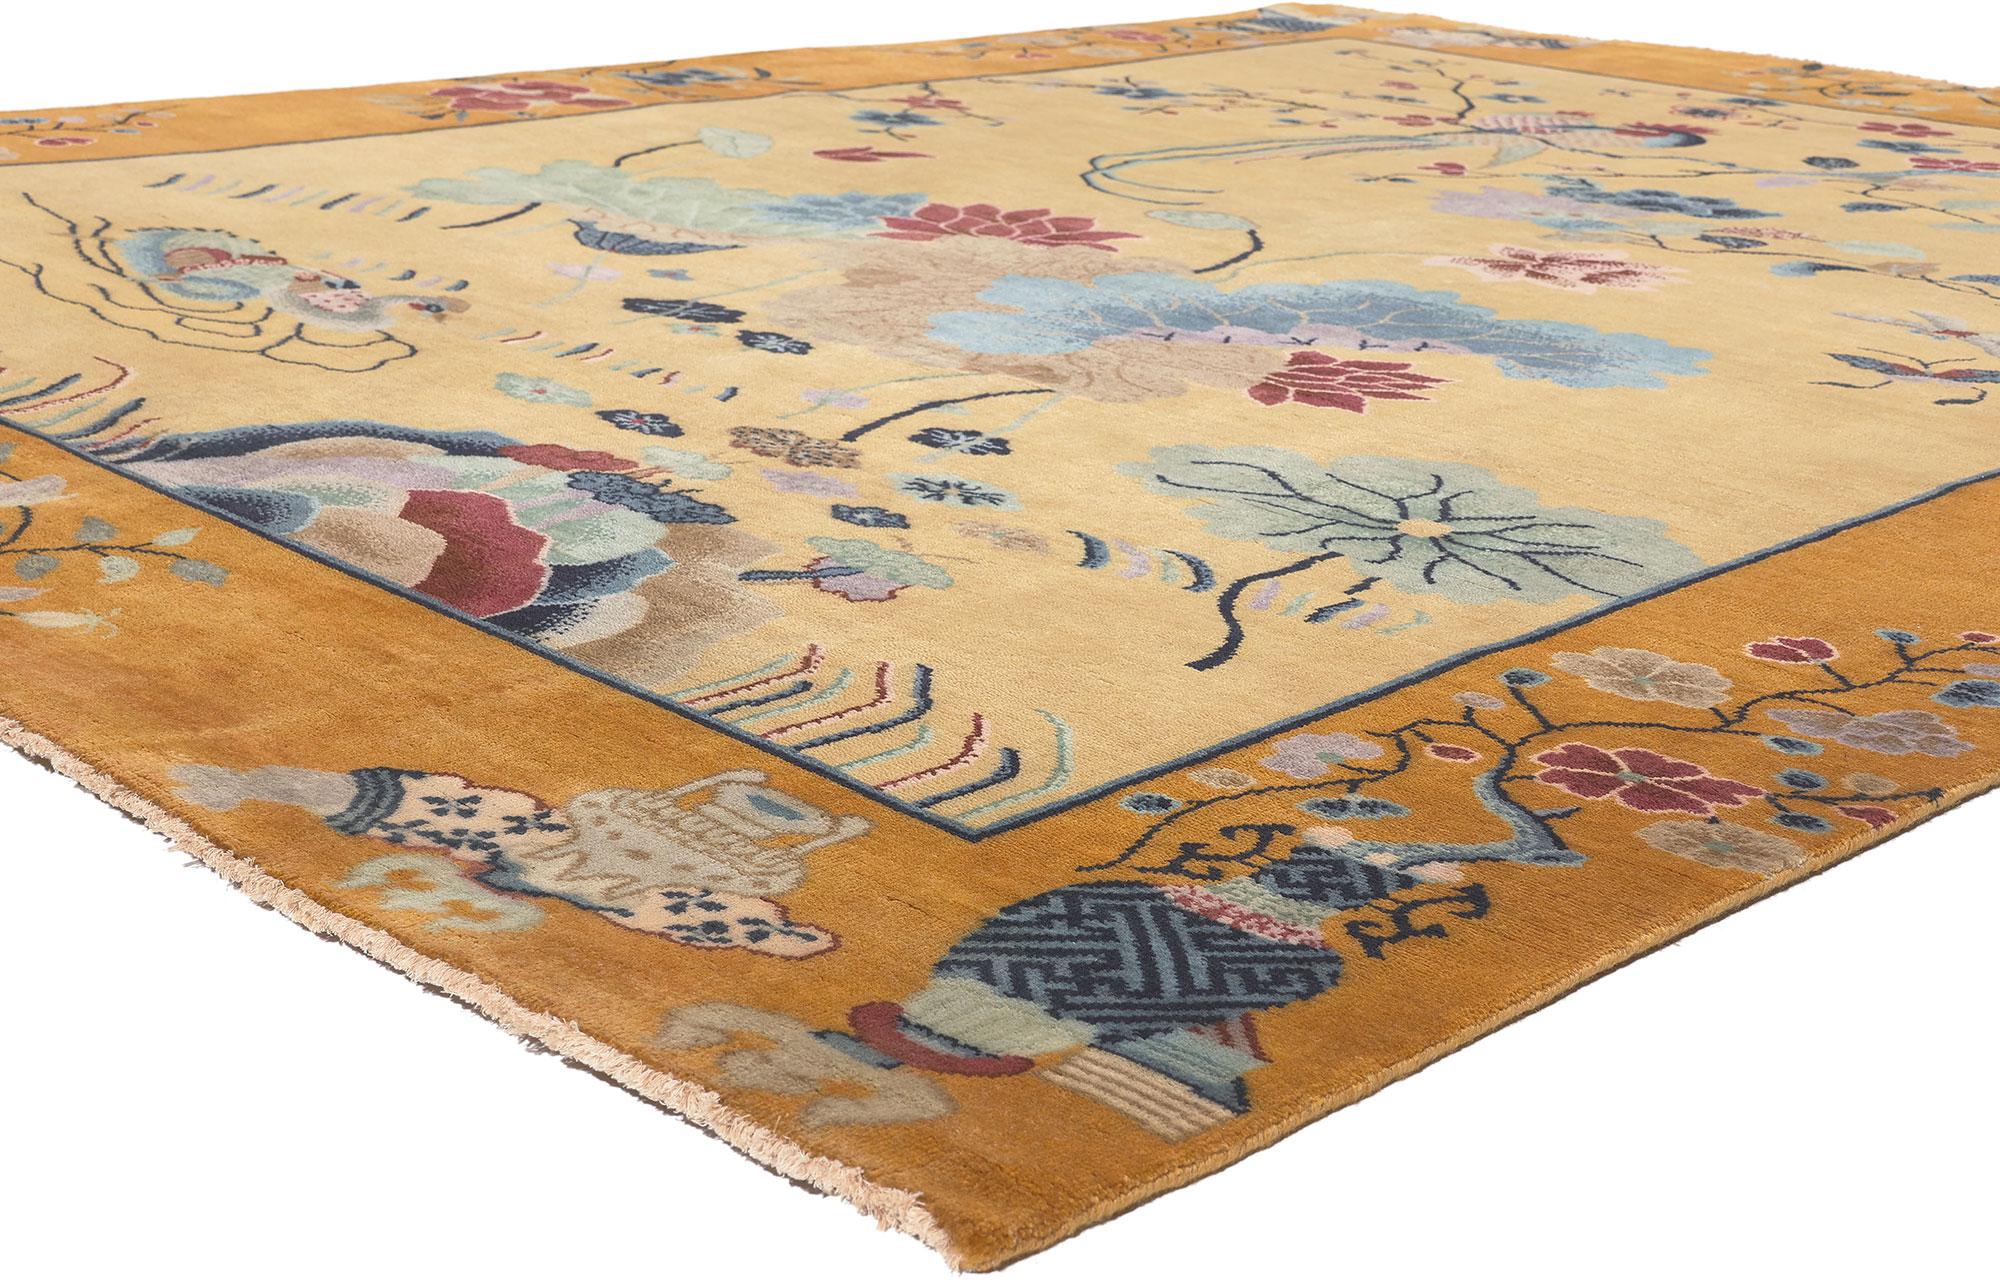 30973 Modern Chinese Art Deco Pictorial Rug, 08'01 x 10'11.
Emanating maximalism with incredible detail and lavish texture, this Chinese Art Deco style rug is a captivating vision of woven beauty. The mythological imagery and vibrant colorway woven